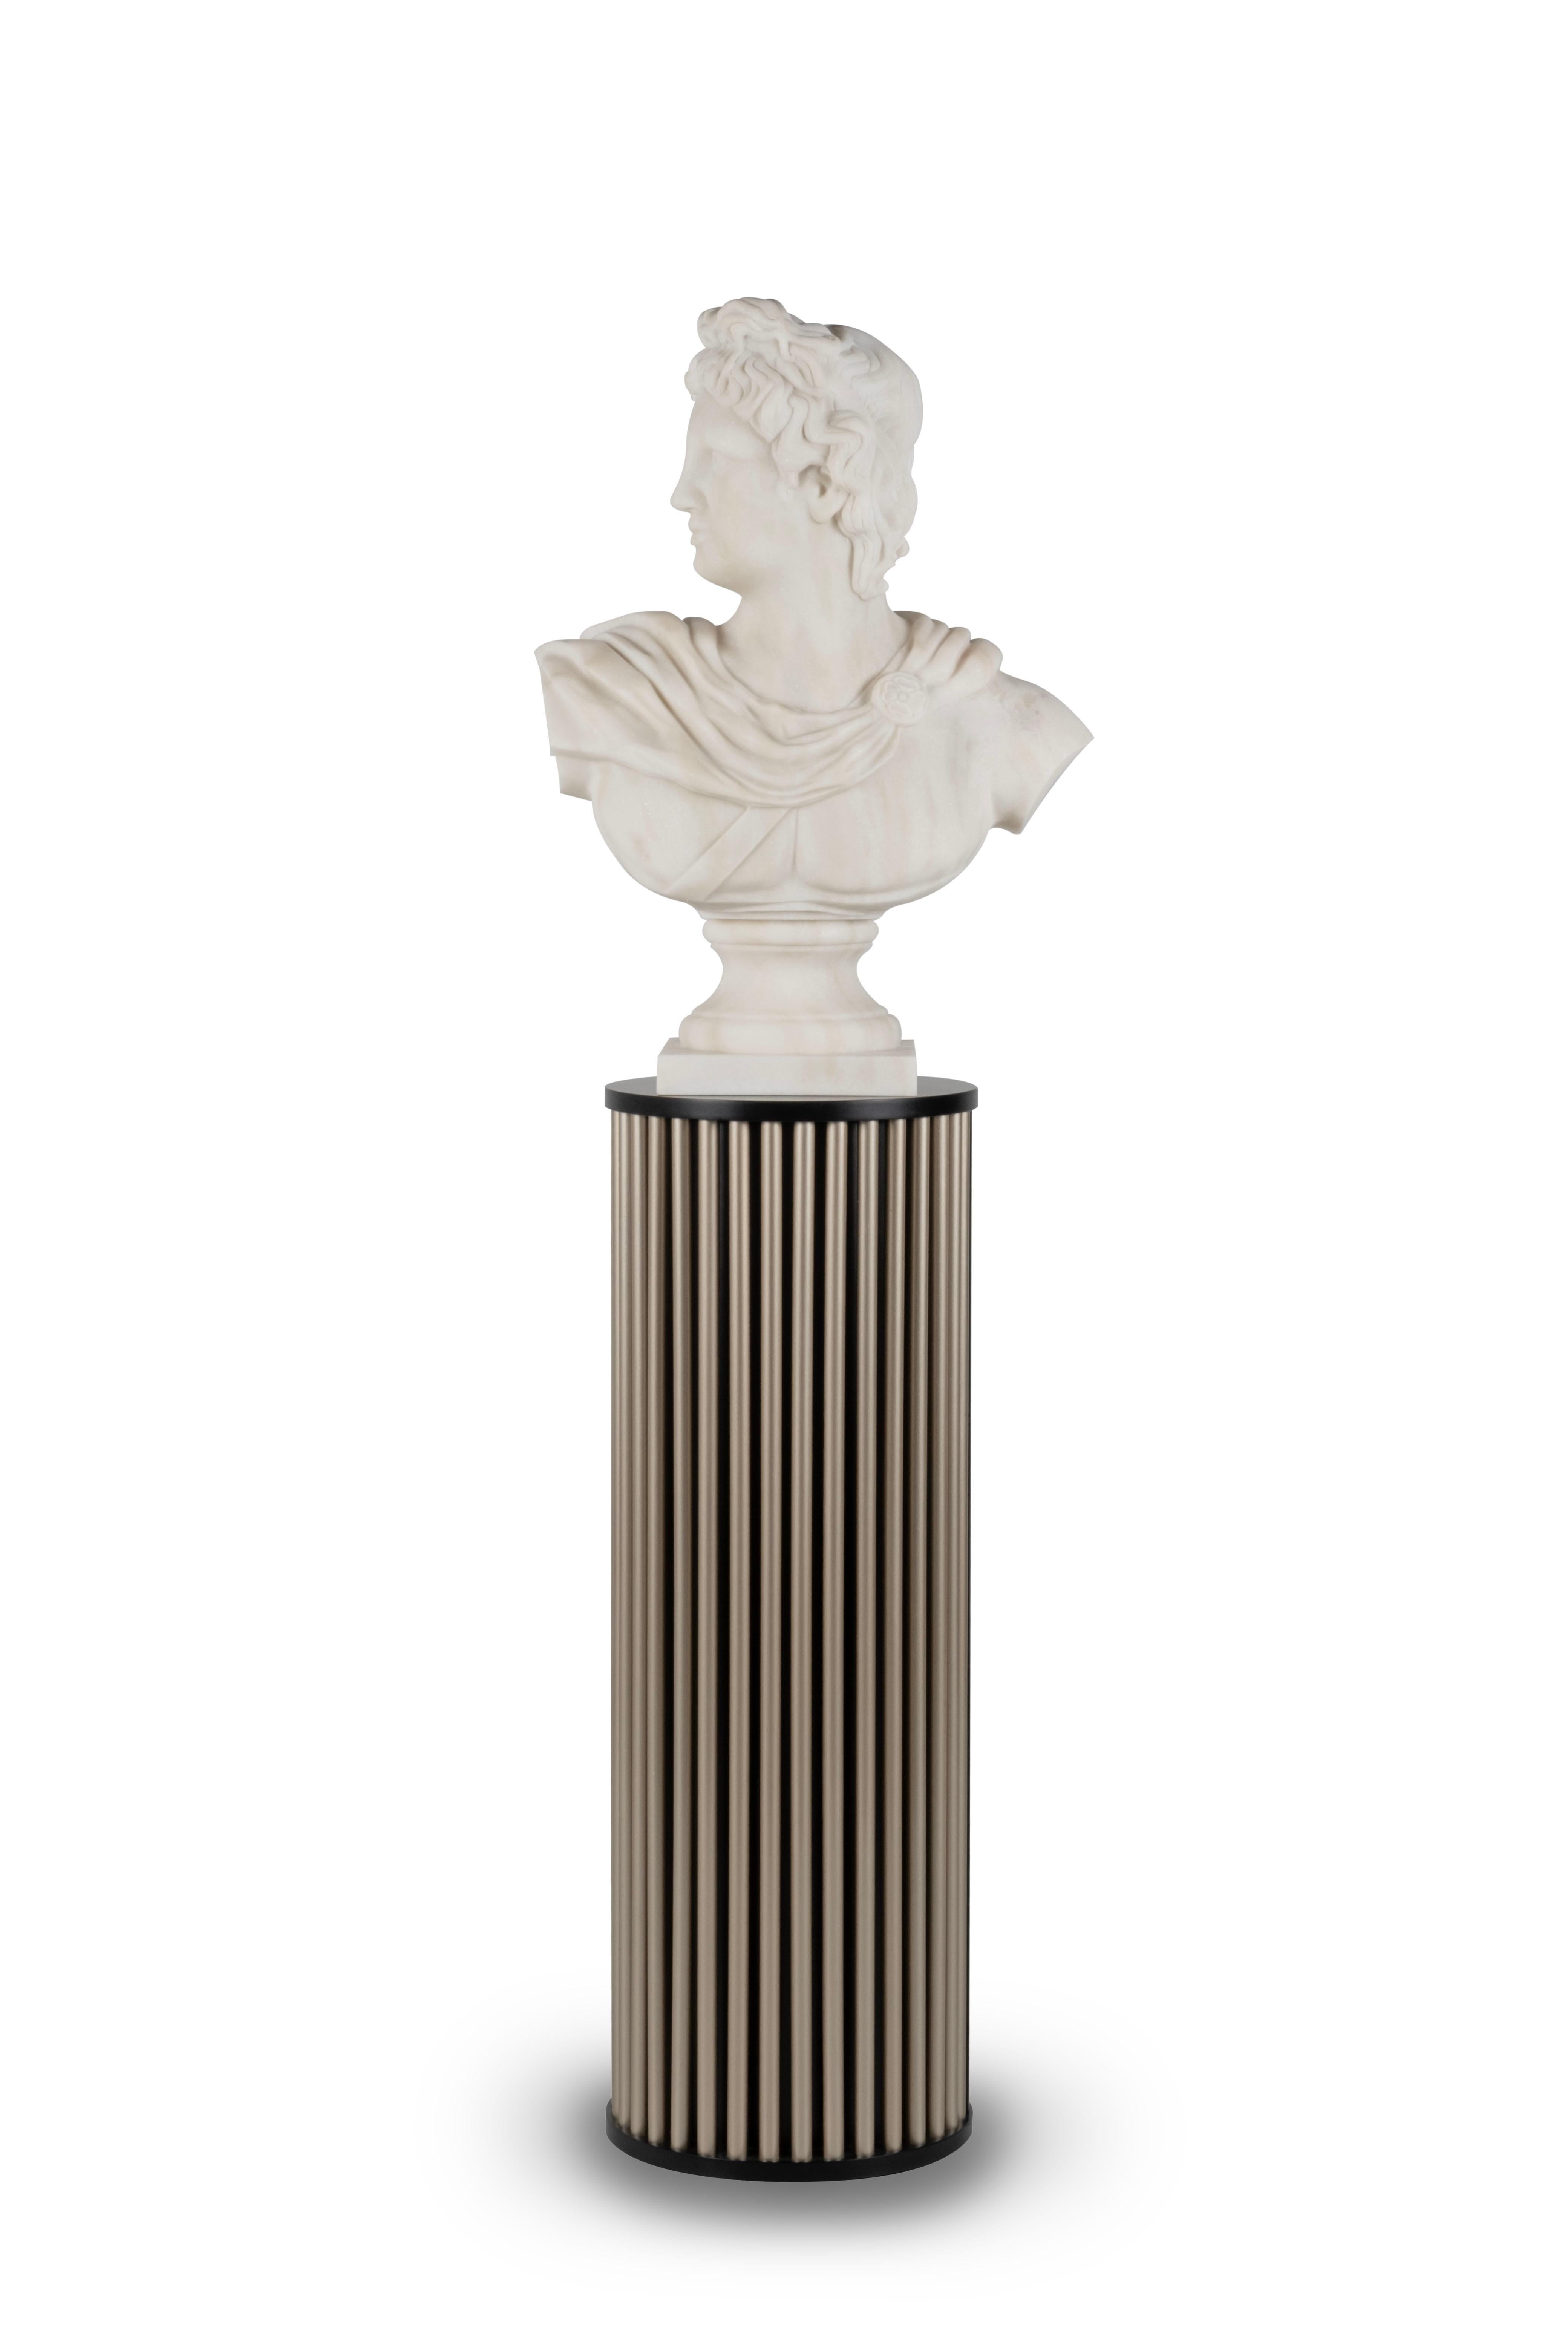 Apolo Bust, Calacatta Bianco Marble, Modern Collection, Handcrafted in Portugal - Europe by GF Modern.

The Apolo bust is a captivating sculptural piece meticulously crafted from Calacatta Bianco marble. As one of the principal entities in